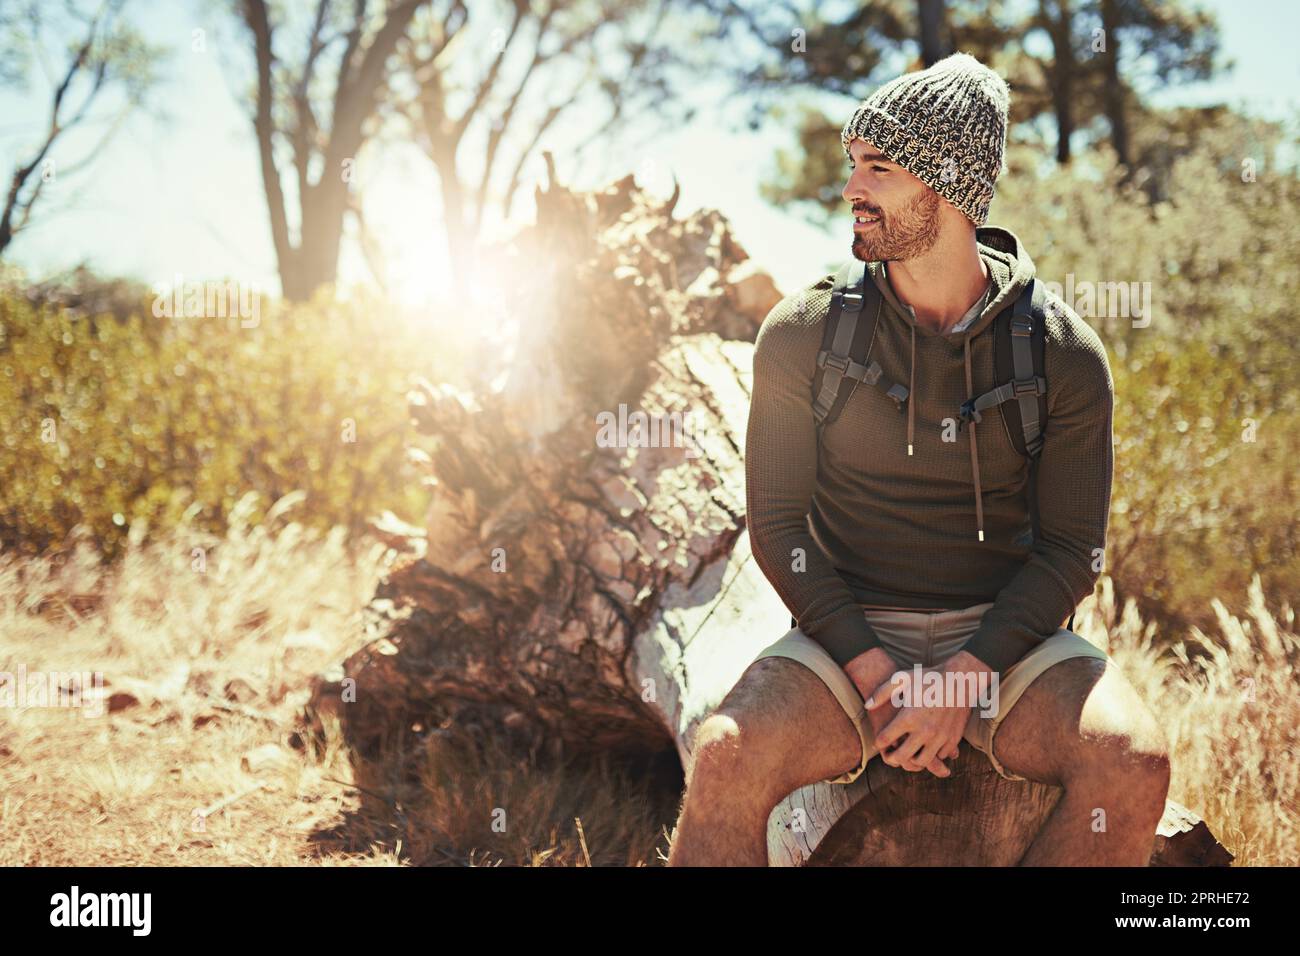 He loves being out here. a young man taking a break while hiking. Stock Photo